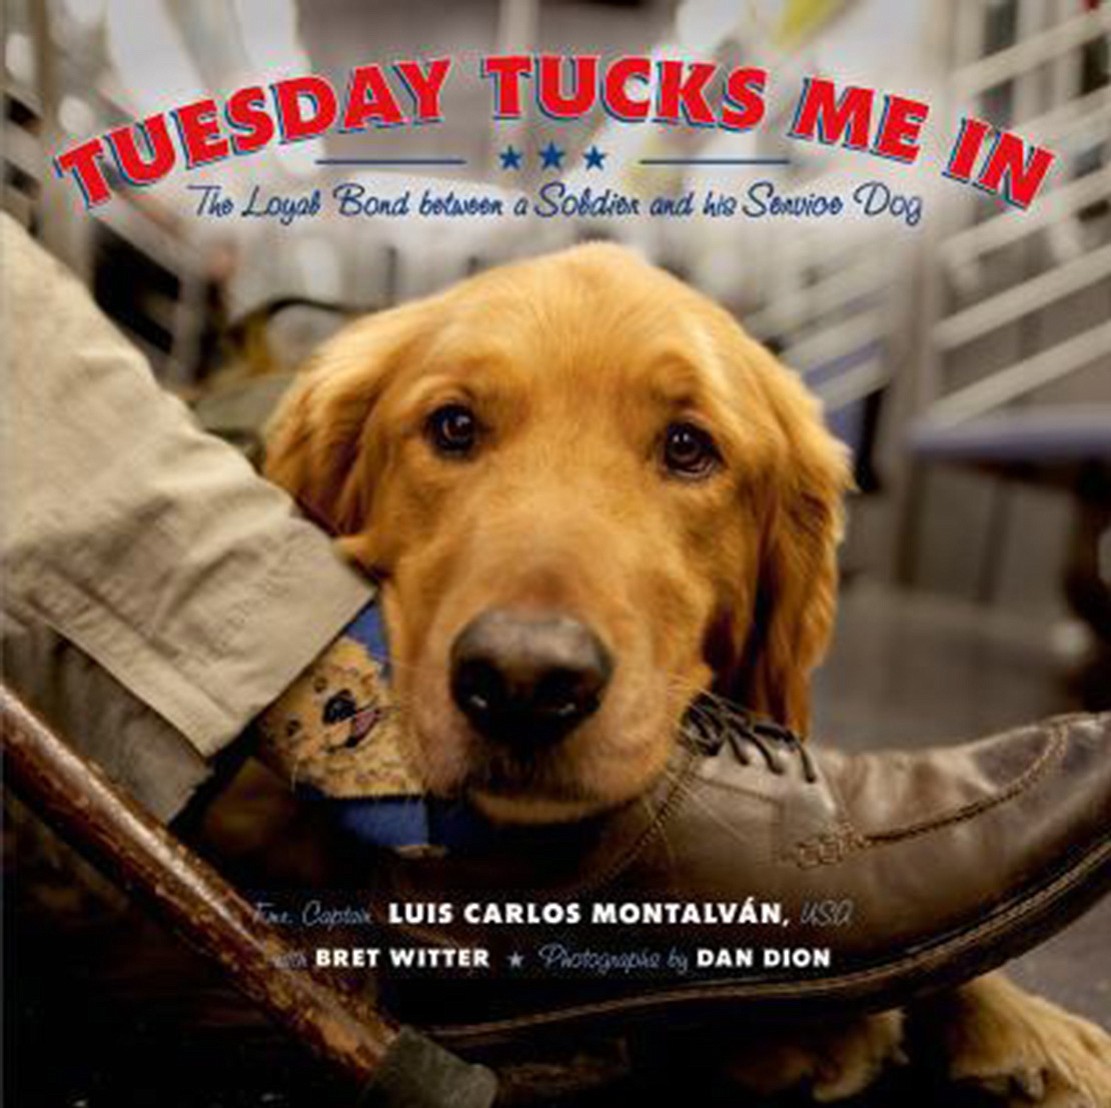 u201cTuesday Tucks Me In: The Loyal Bond Between a Soldier and His Service Dogu201d
By Luis Carlos Montalvan: Roaring Book Press, 39 pages.